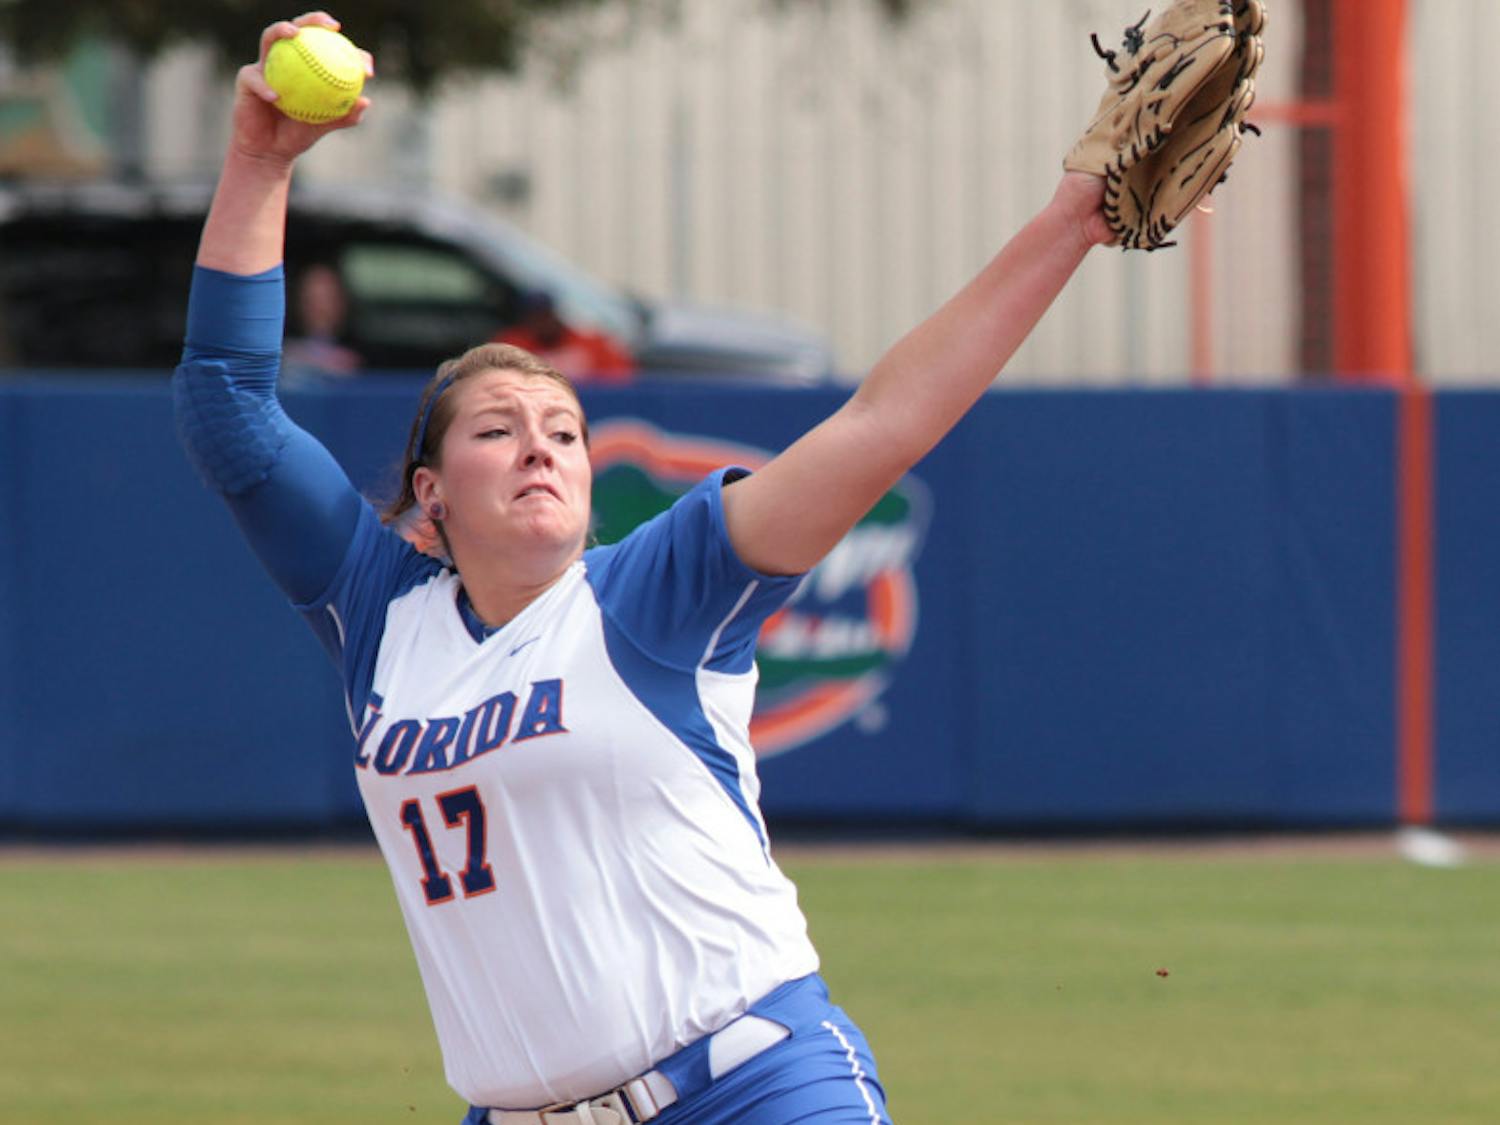 Gators sophomore Lauren Haeger pitches during a game last season. The sophomore helped Florida beat No. 1 Alabama 8-4 on Wednesday.